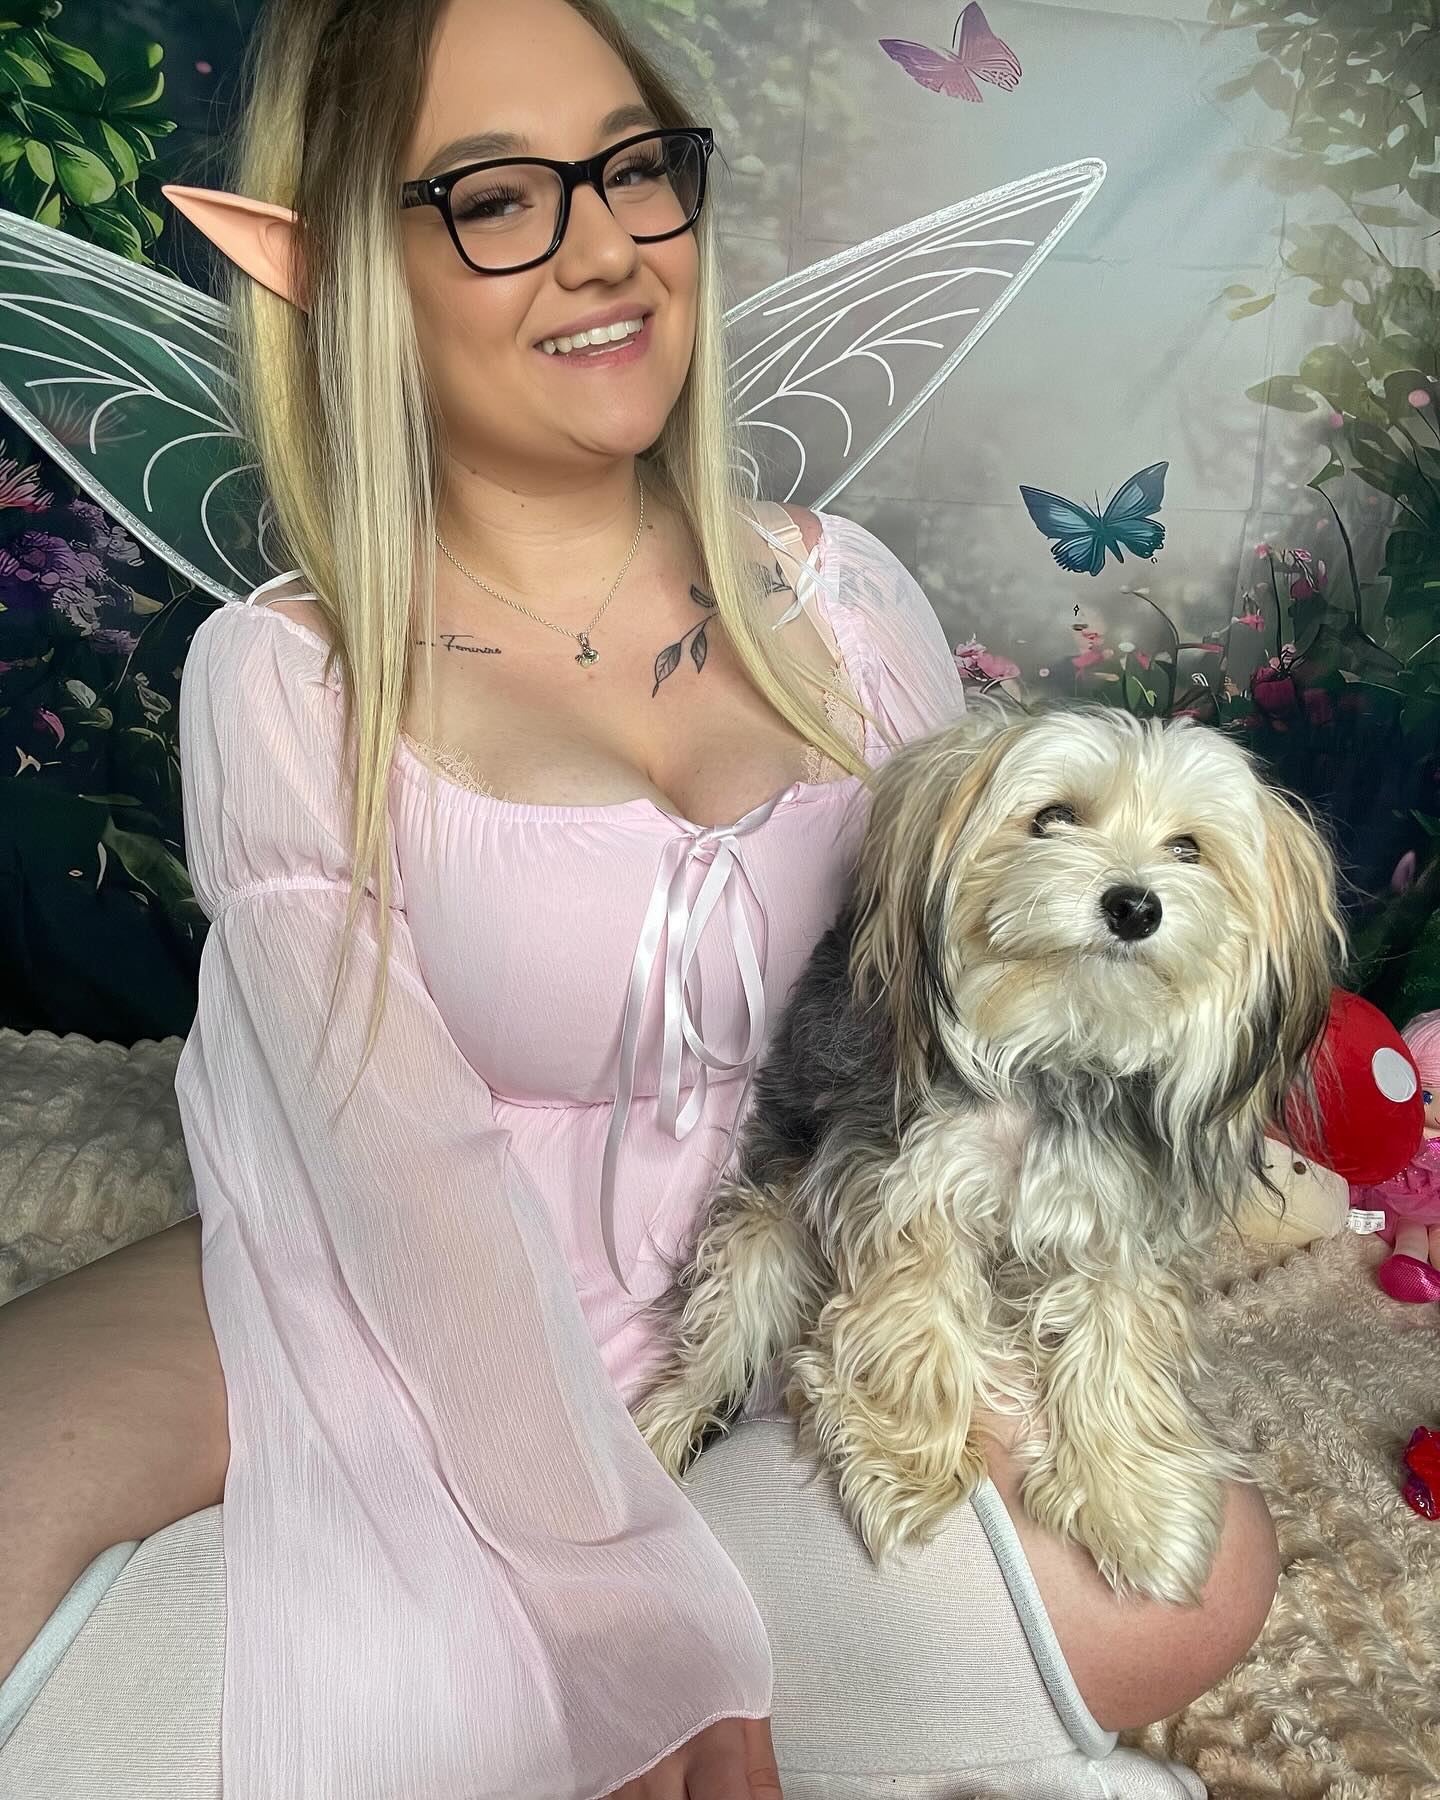 Just a Fairy & her furry friend 🐾🧚‍♀️✨ #fyp #explore #foryoupage #explorepage